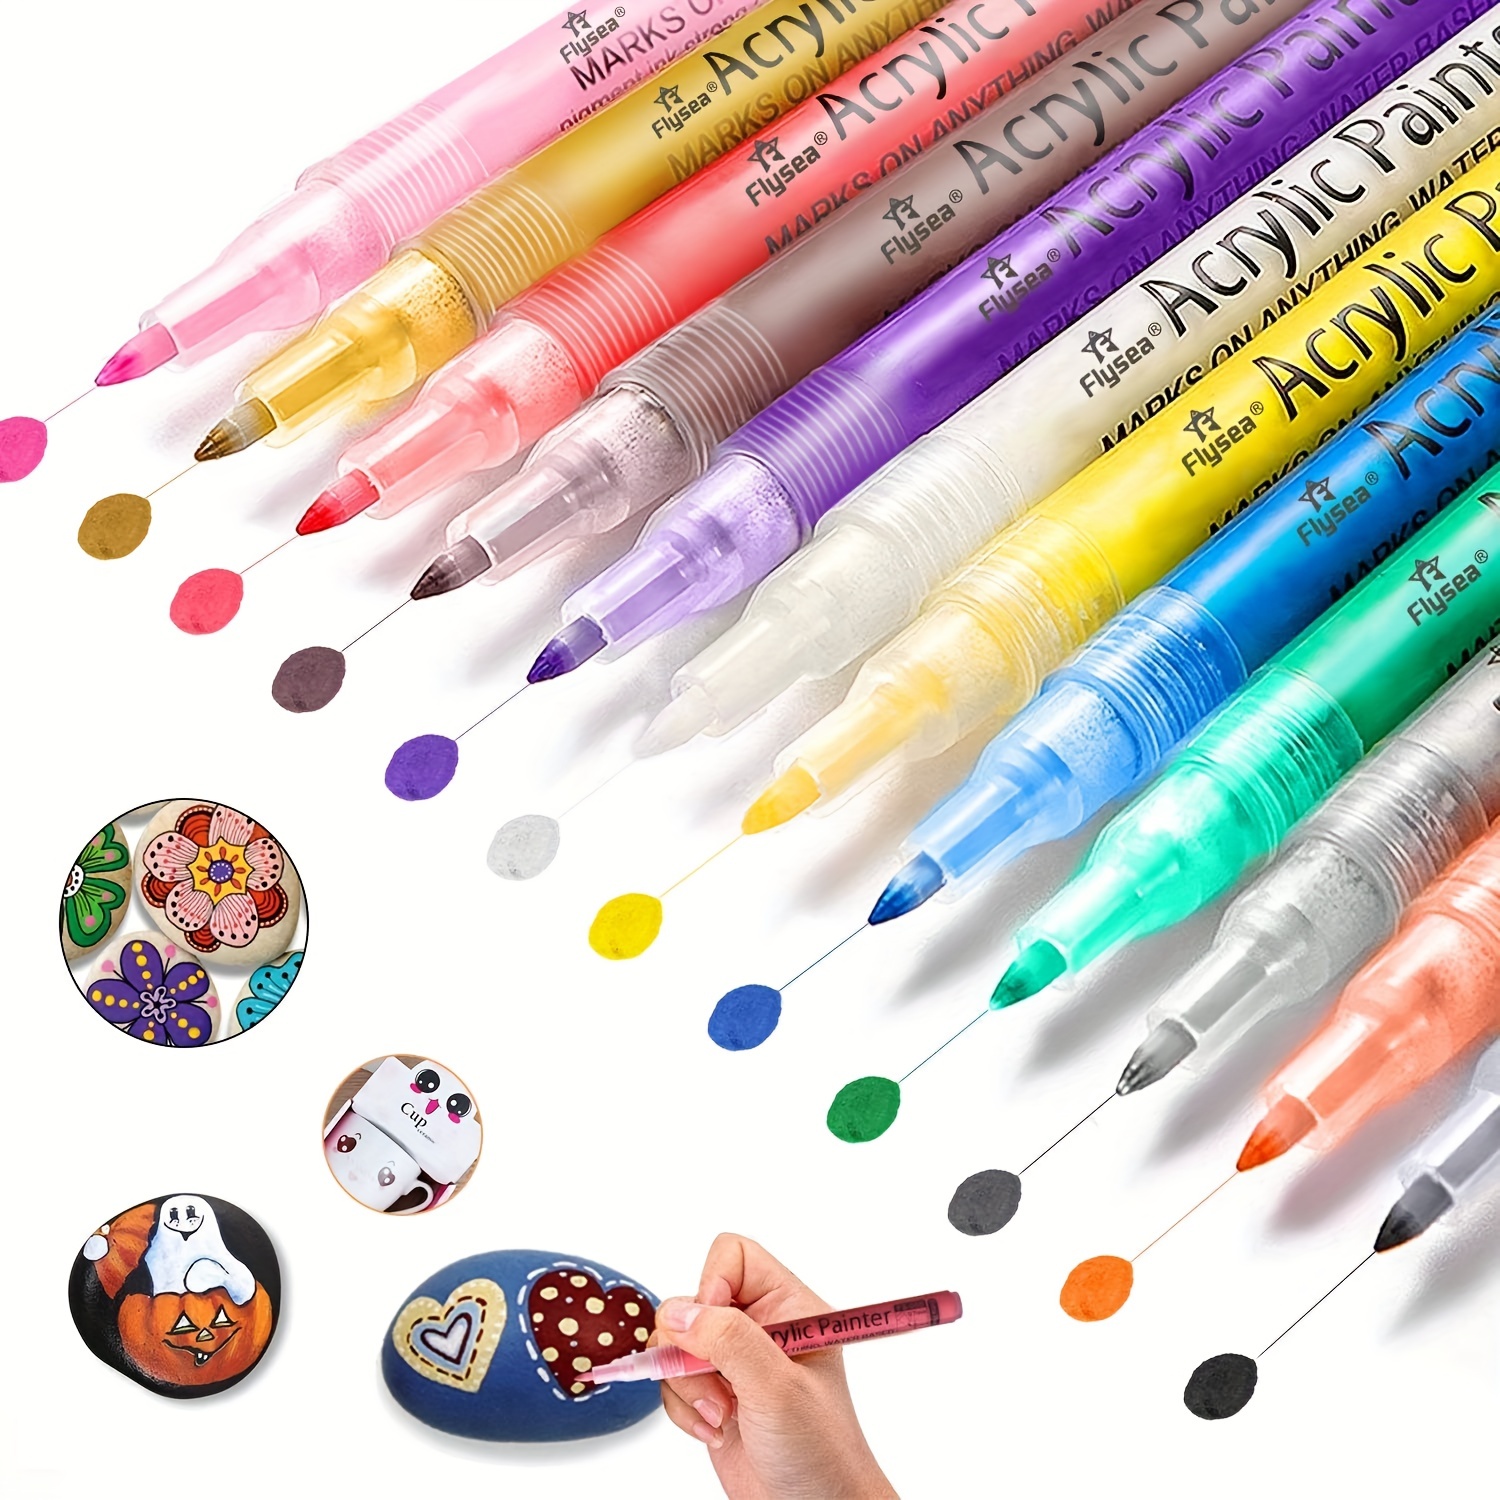 Acrylic Paint Pens Paint Markers for Rock Painting, Canvas, Wood, Glass,  Fabric, Metal, Plastic, Arts Crafts Easter Eggs, Pumpkin, Scrapbooking  Supplies, Graffiti Markers for Adults Kids